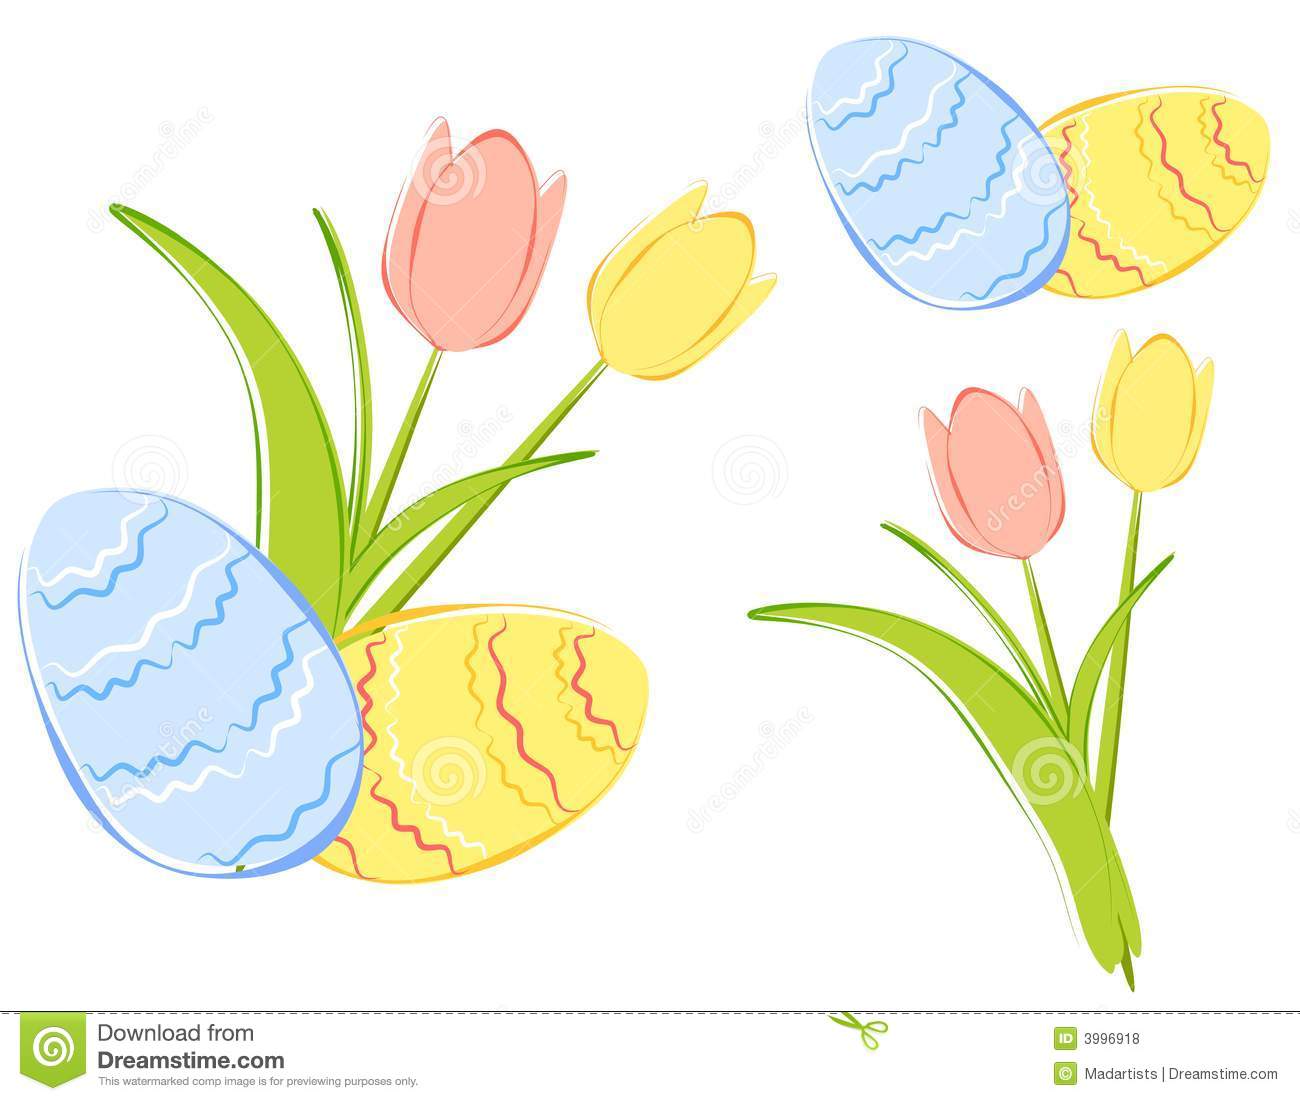 Featuring A Pair Of Spring Tulips In Pink And Yellow With Easter Eggs